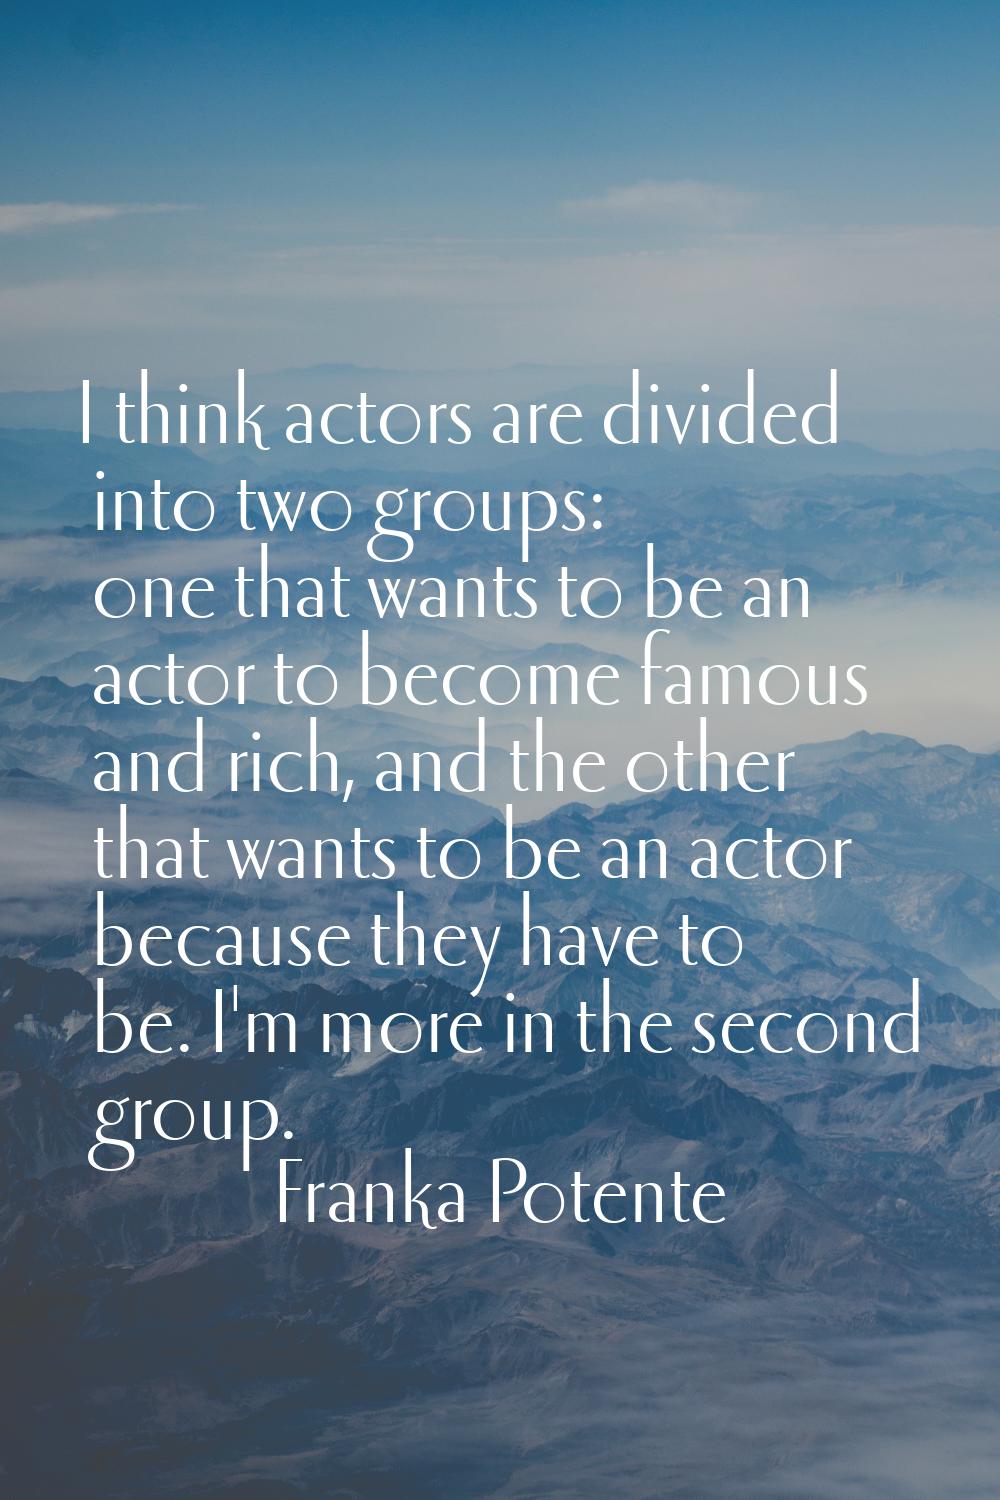 I think actors are divided into two groups: one that wants to be an actor to become famous and rich